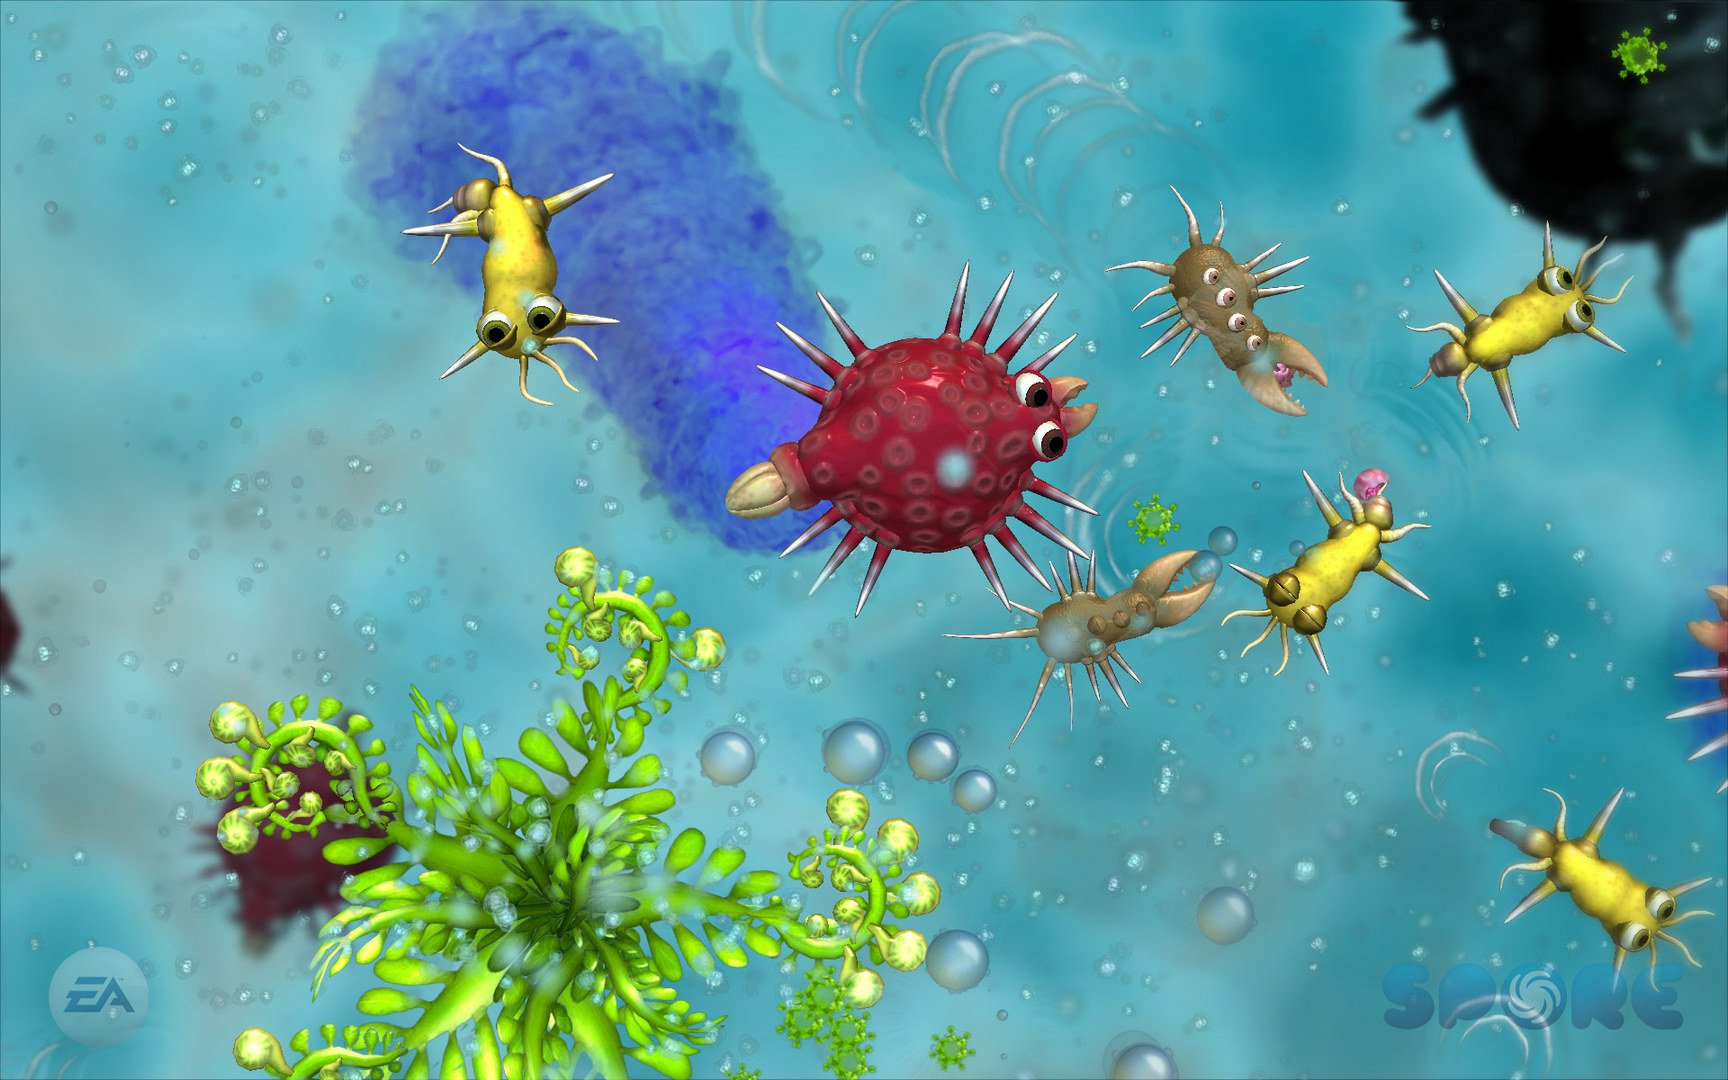 SPORE Complete Pack 10